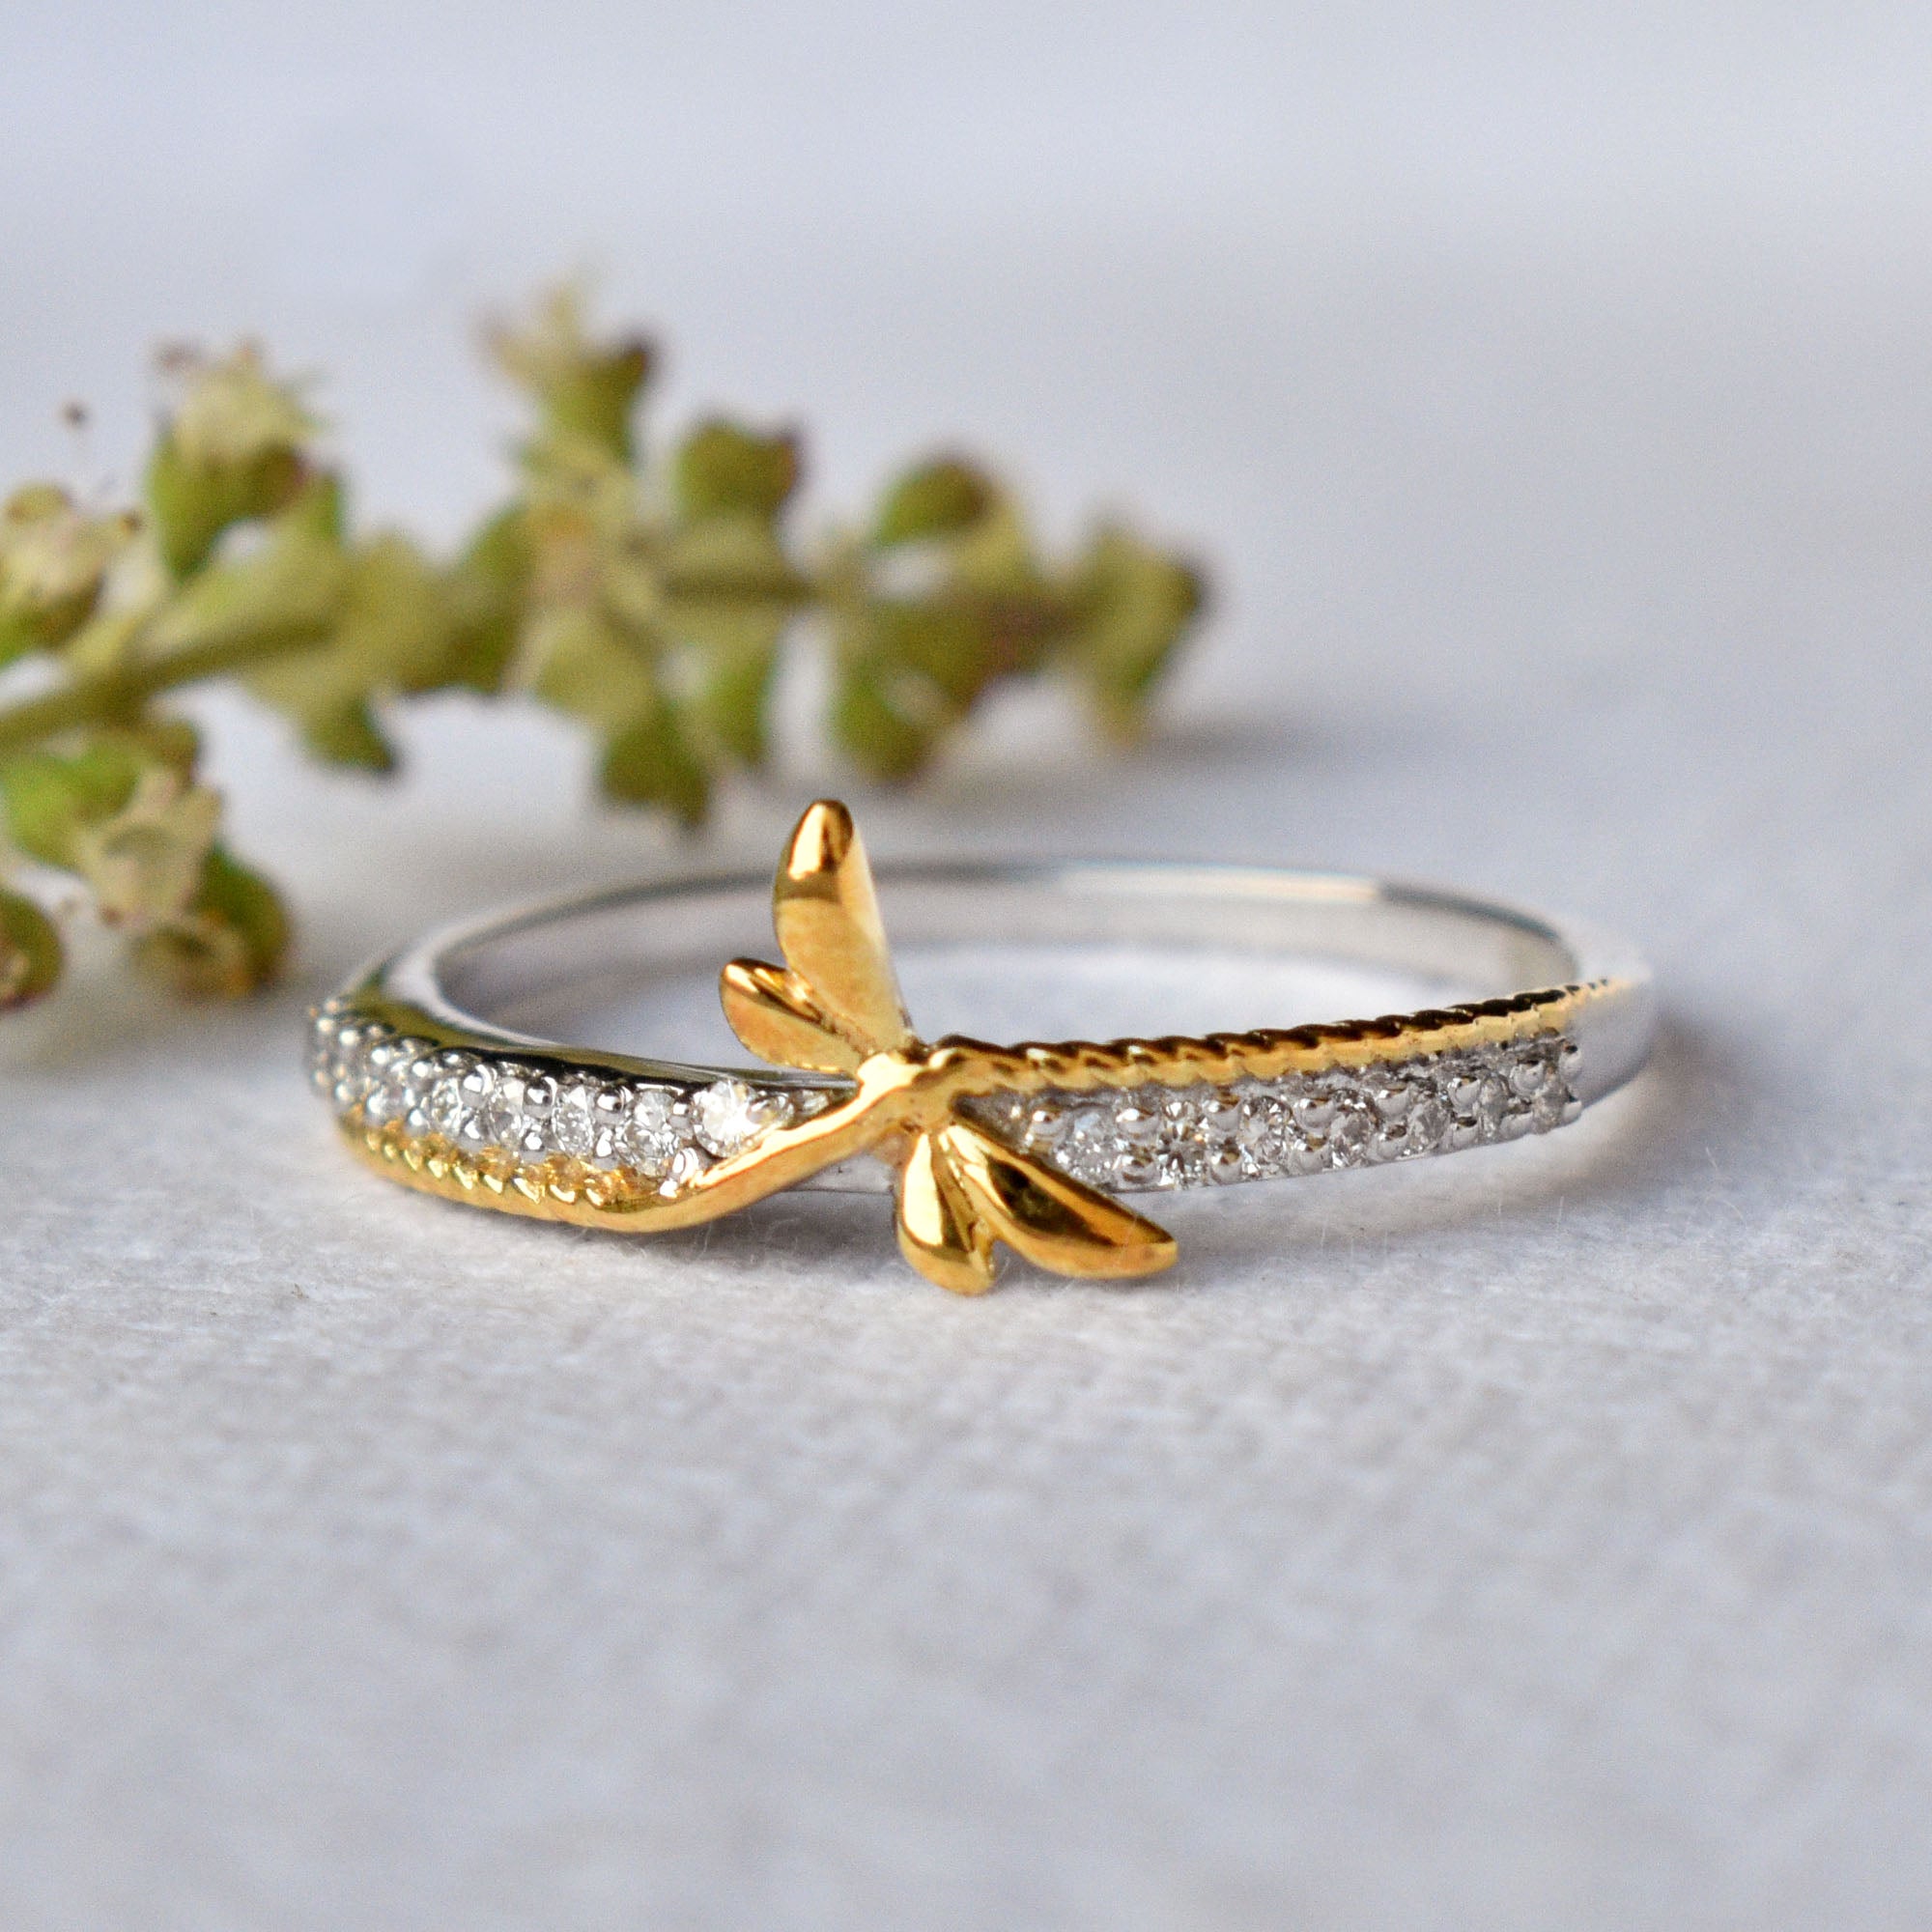 Buy Dragonfly Ring in Sterling Silver & Natural Diamond, Damselfly Insect  Jewelry, Remembrance Gifts Online in India - Etsy